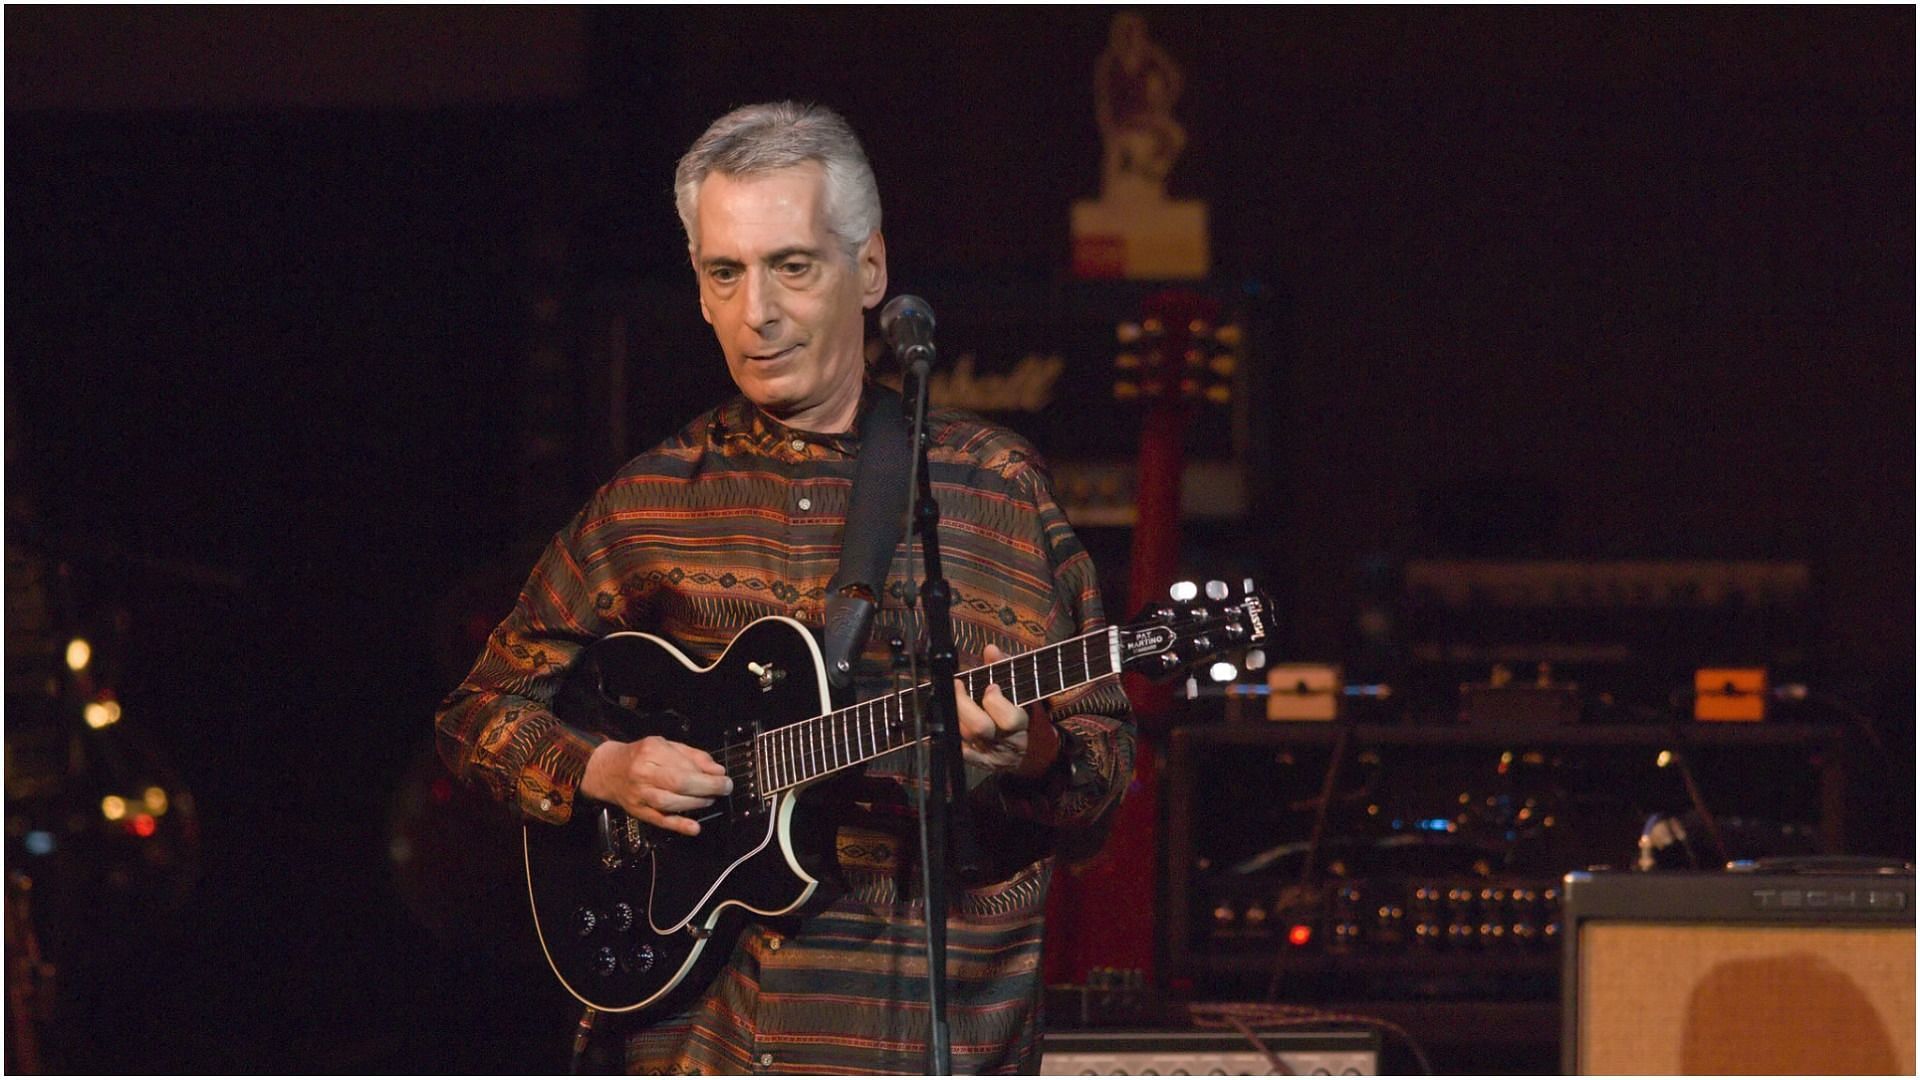 Pat Martino during Les Paul 90th Birthday Salute at Carnegie Hall in New York City, New York, United States (Image via Getty Images)